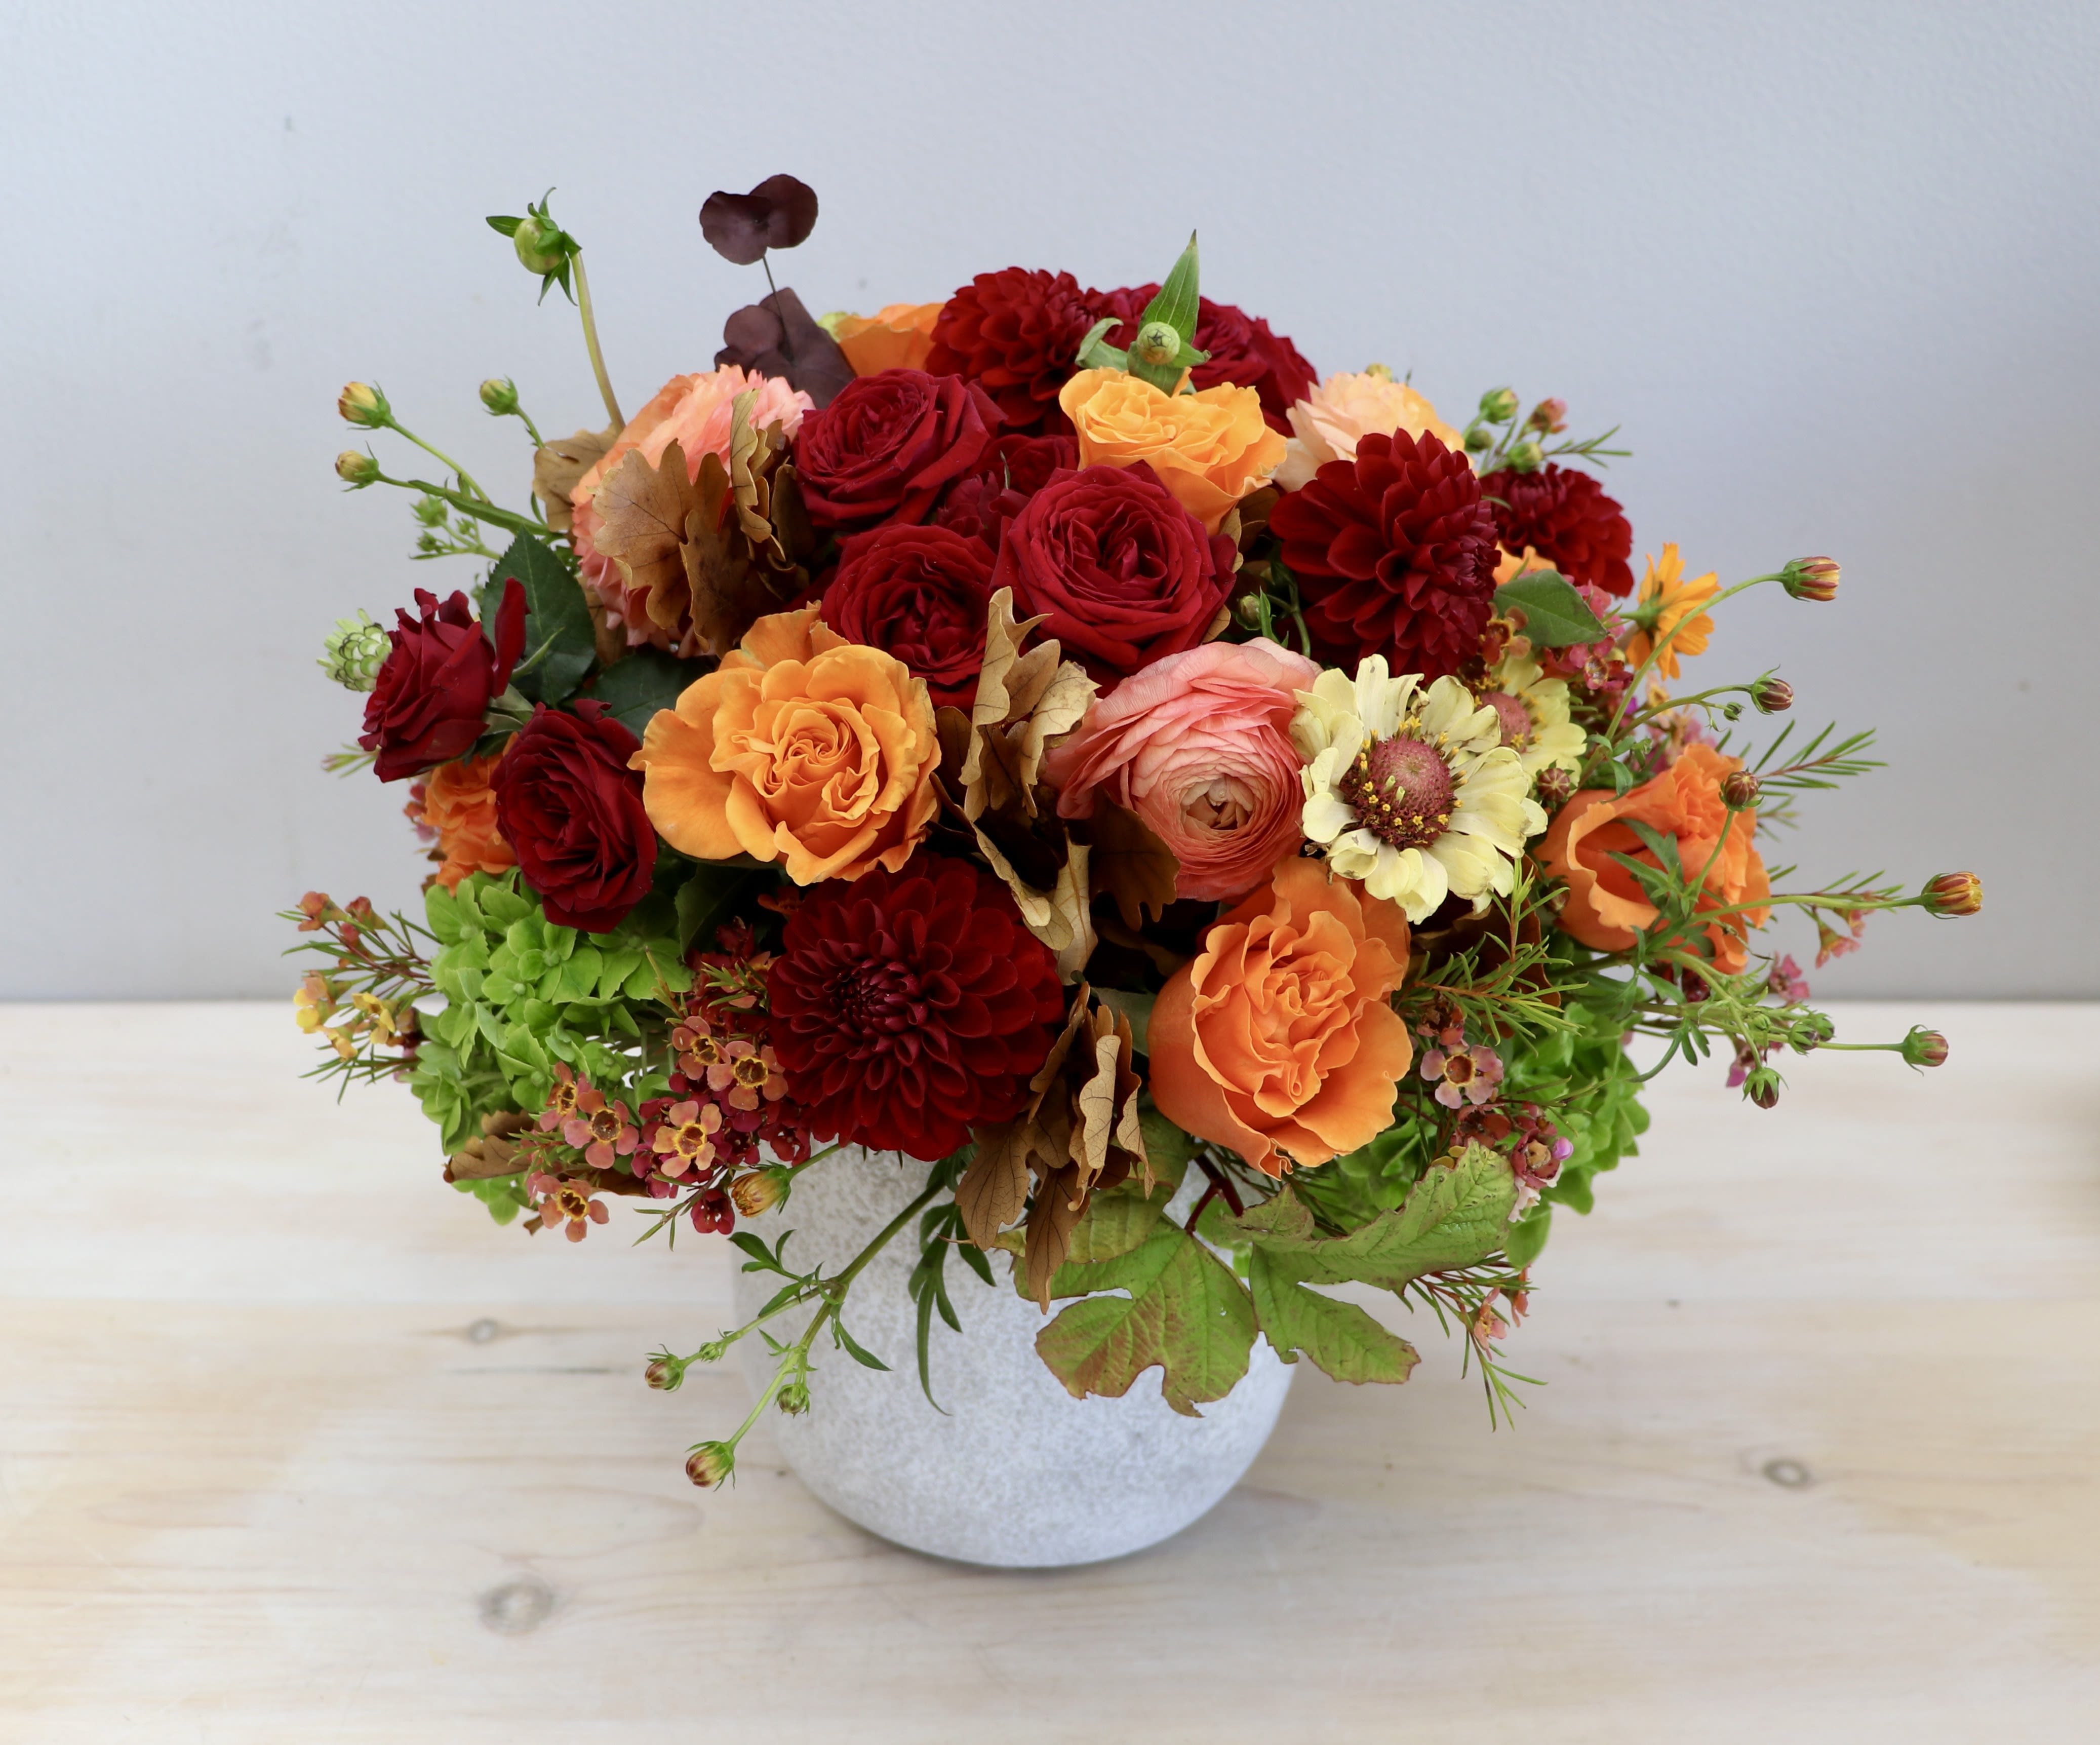 Warm Welcome - My Glendale Florist  - An autumn-themed floral arrangement with orange roses, ranunculus, hydrangeas, and fall greenery is a stunning display of the season's beauty and color. It would make a perfect centerpiece for a Thanksgiving dinner table or a beautiful gift for a friend or loved one. The arrangement is displayed in the standard size, about 10-12 inches tall and wide. 